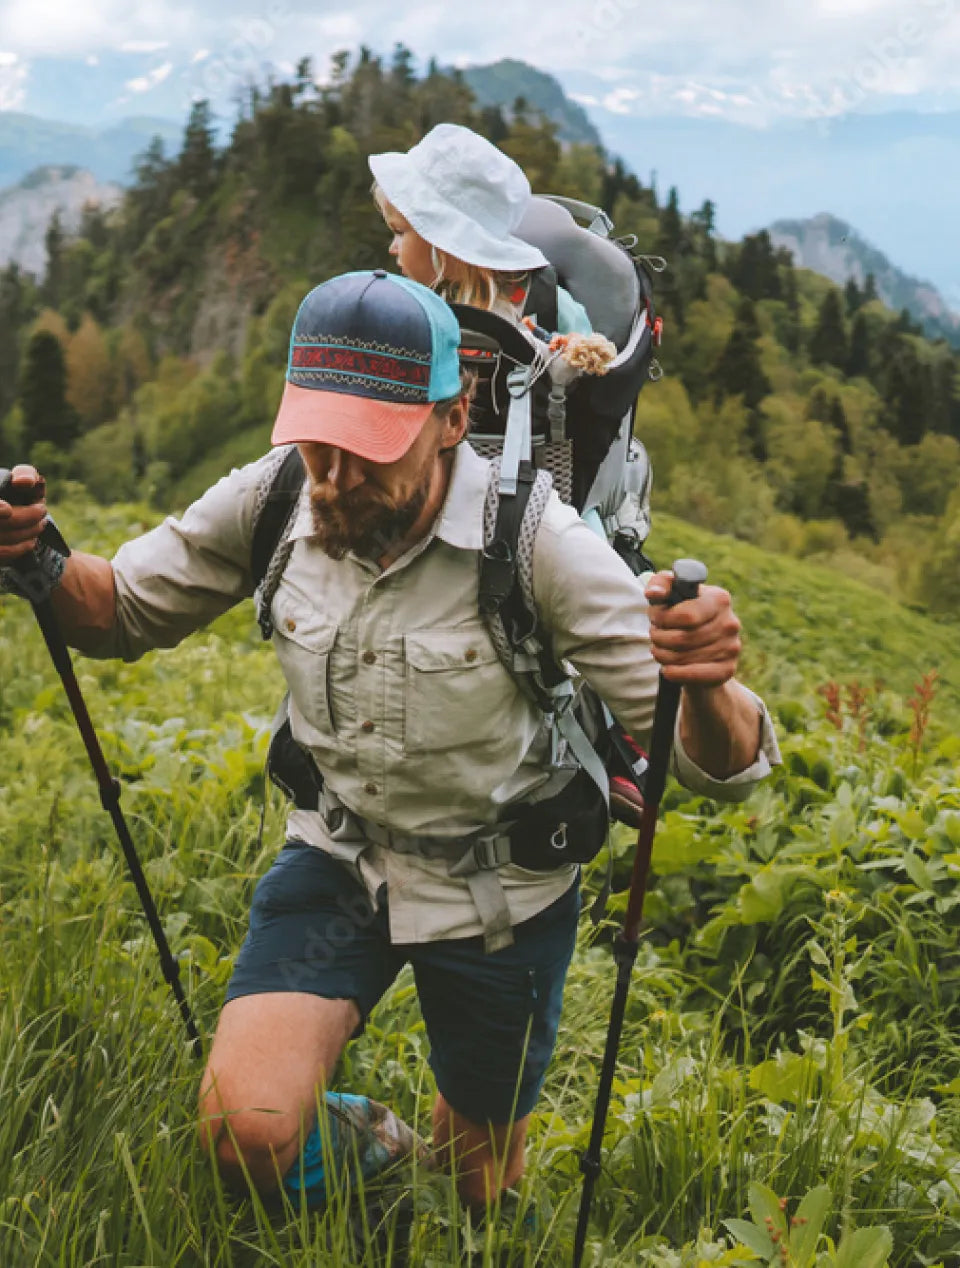 A man hiking in the mountains, with his daughter in a baby carrier backpack.